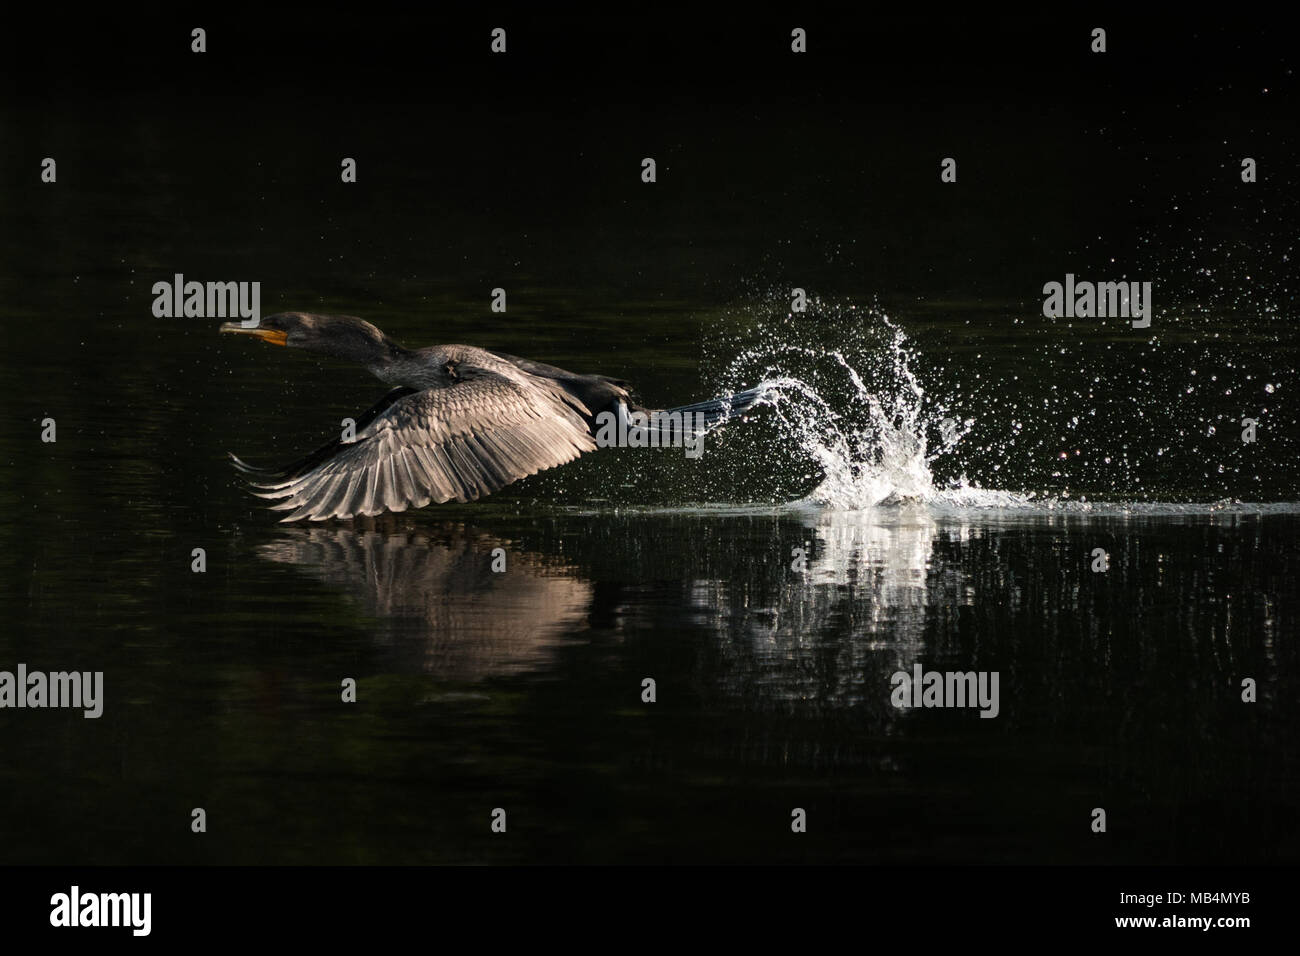 A Coromorant Splashing and Taking Off Over Water Stock Photo